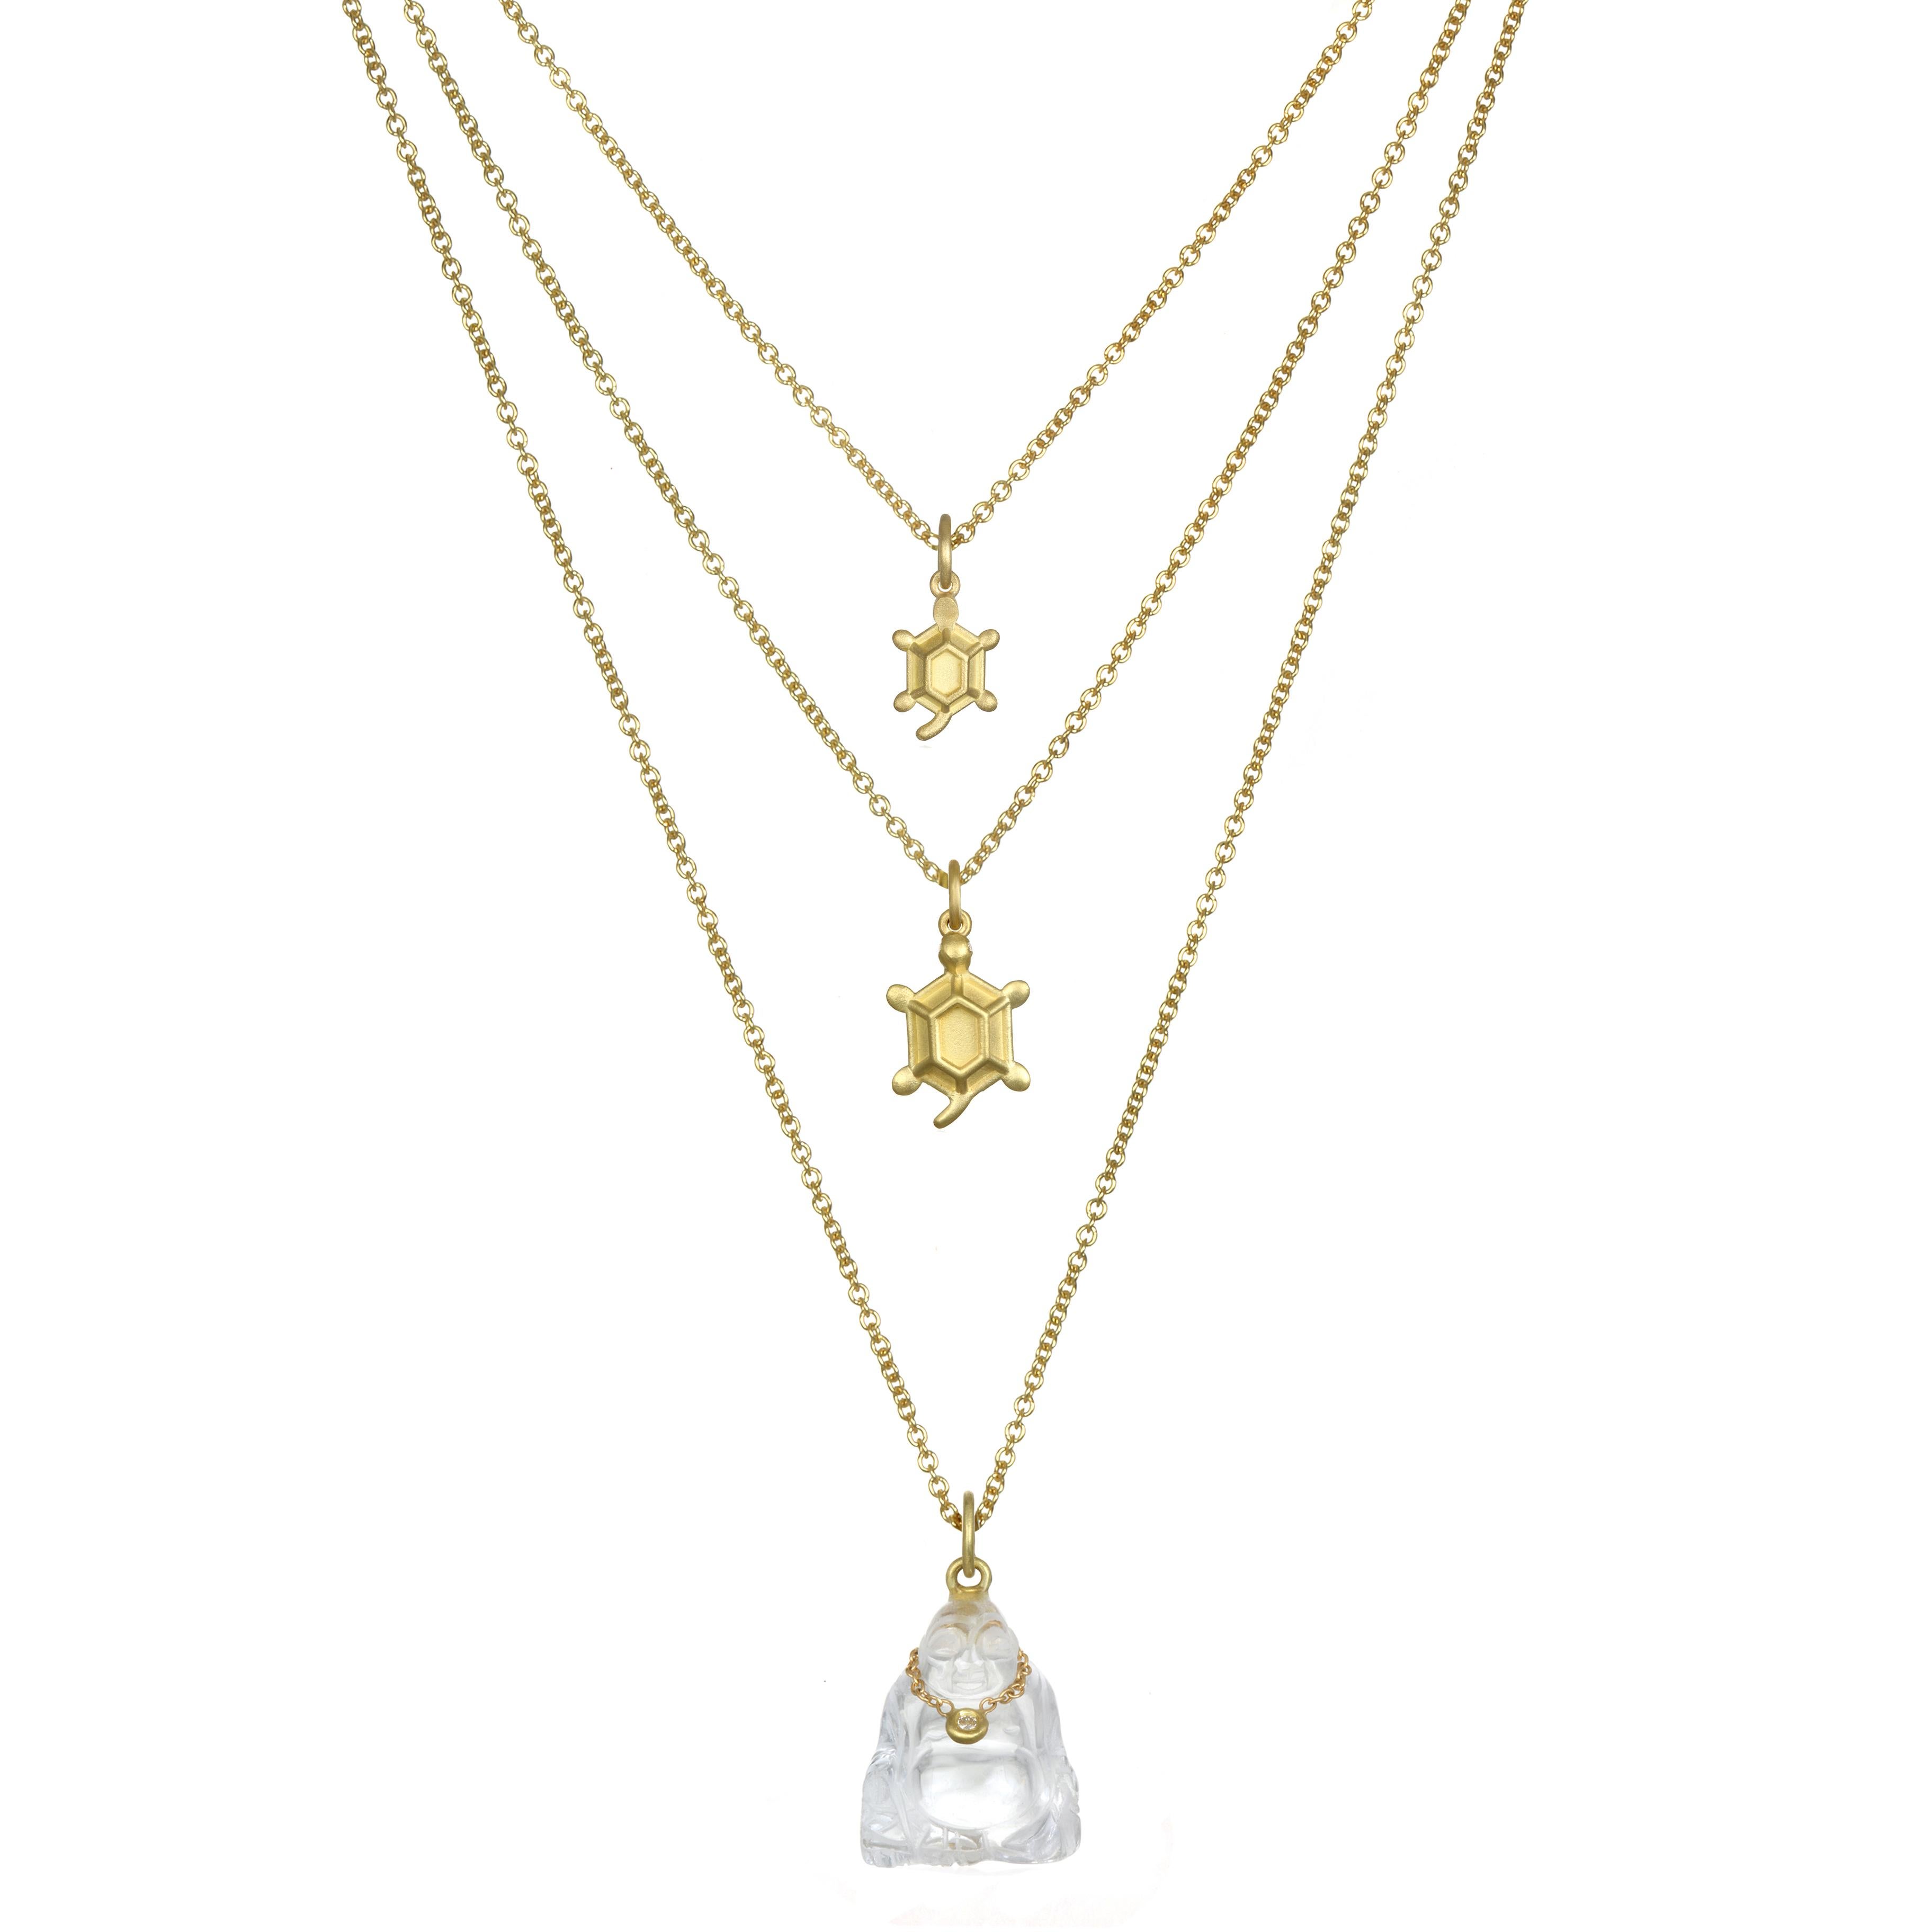 For the turtle lover - symbolizing good health and longevity. 
This Faye Kim baby turtle charm is finely crafted in 18 karat gold and hangs on an adjustable cable chain.

Turtle length: .5